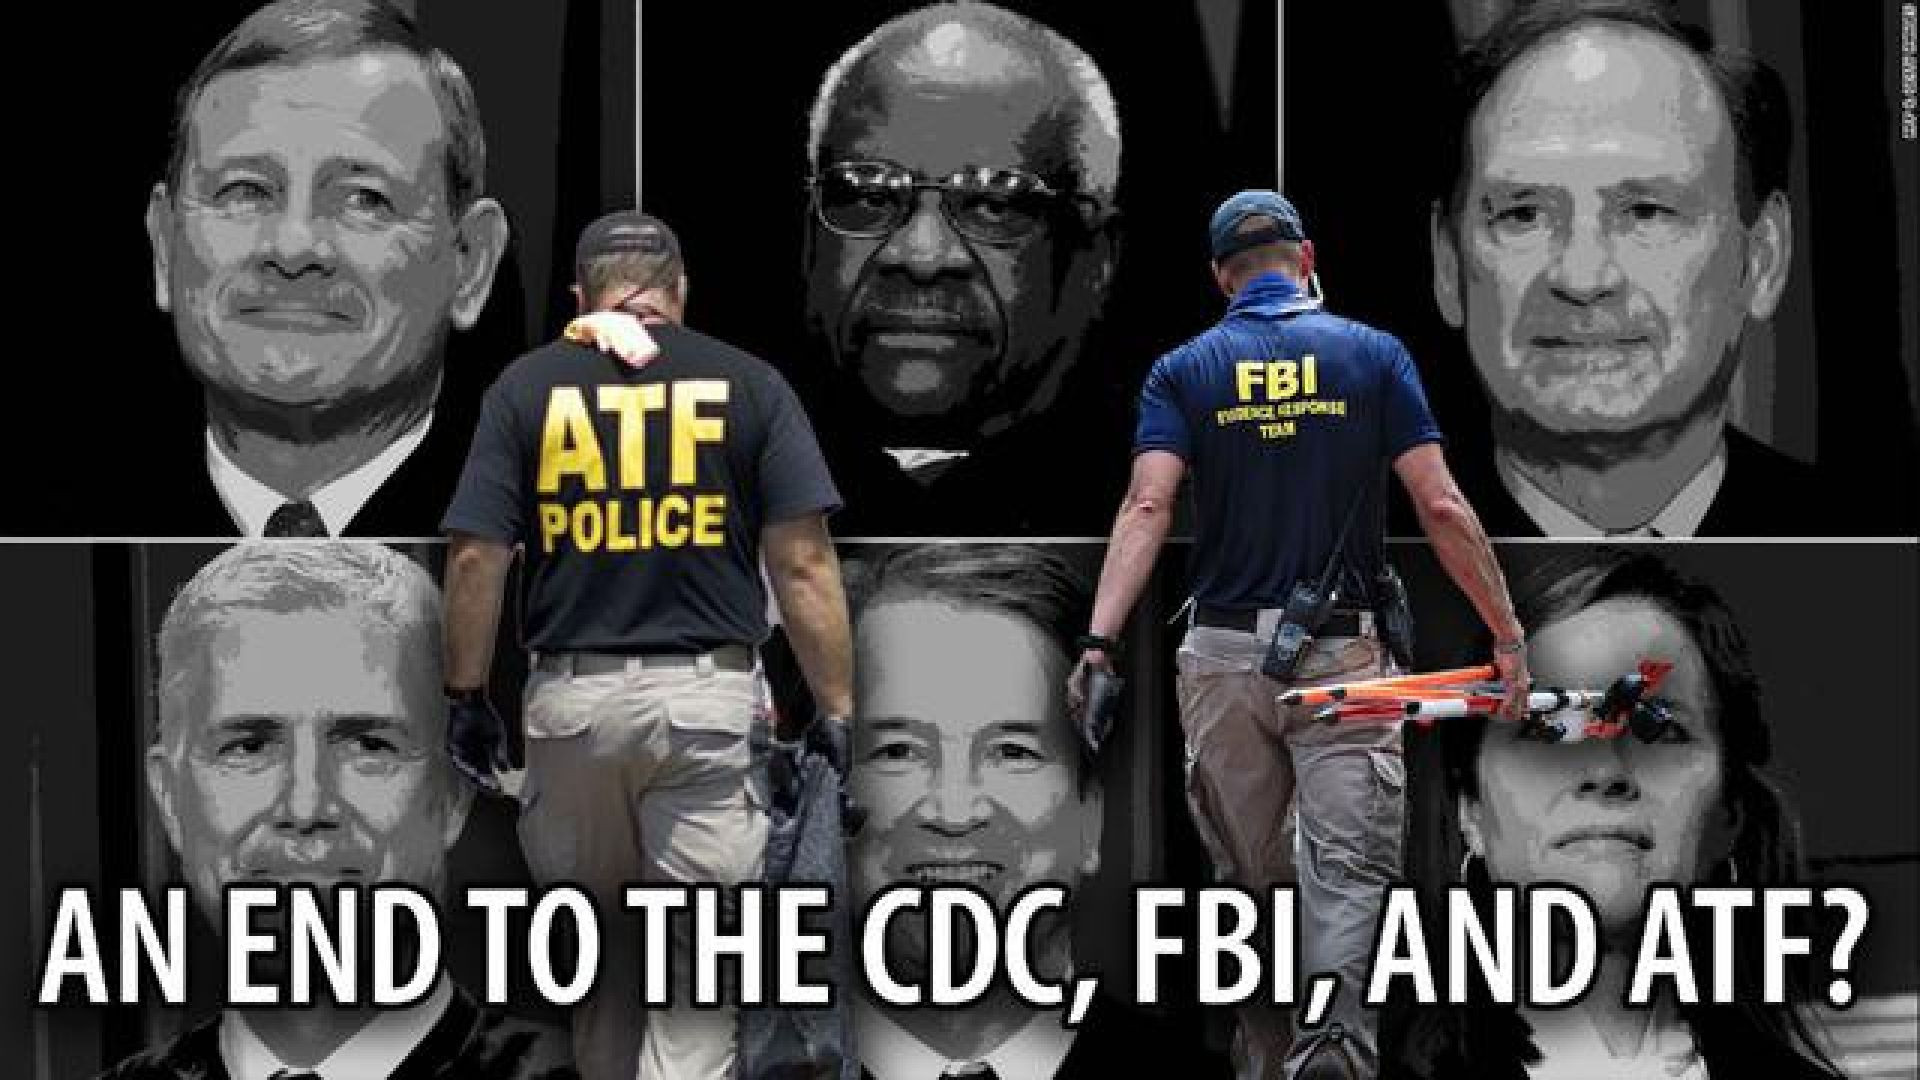 RECENT SCOTUS RULING COULD BRING AN END TO THE POWER OF CDC, FBI, AND ATF